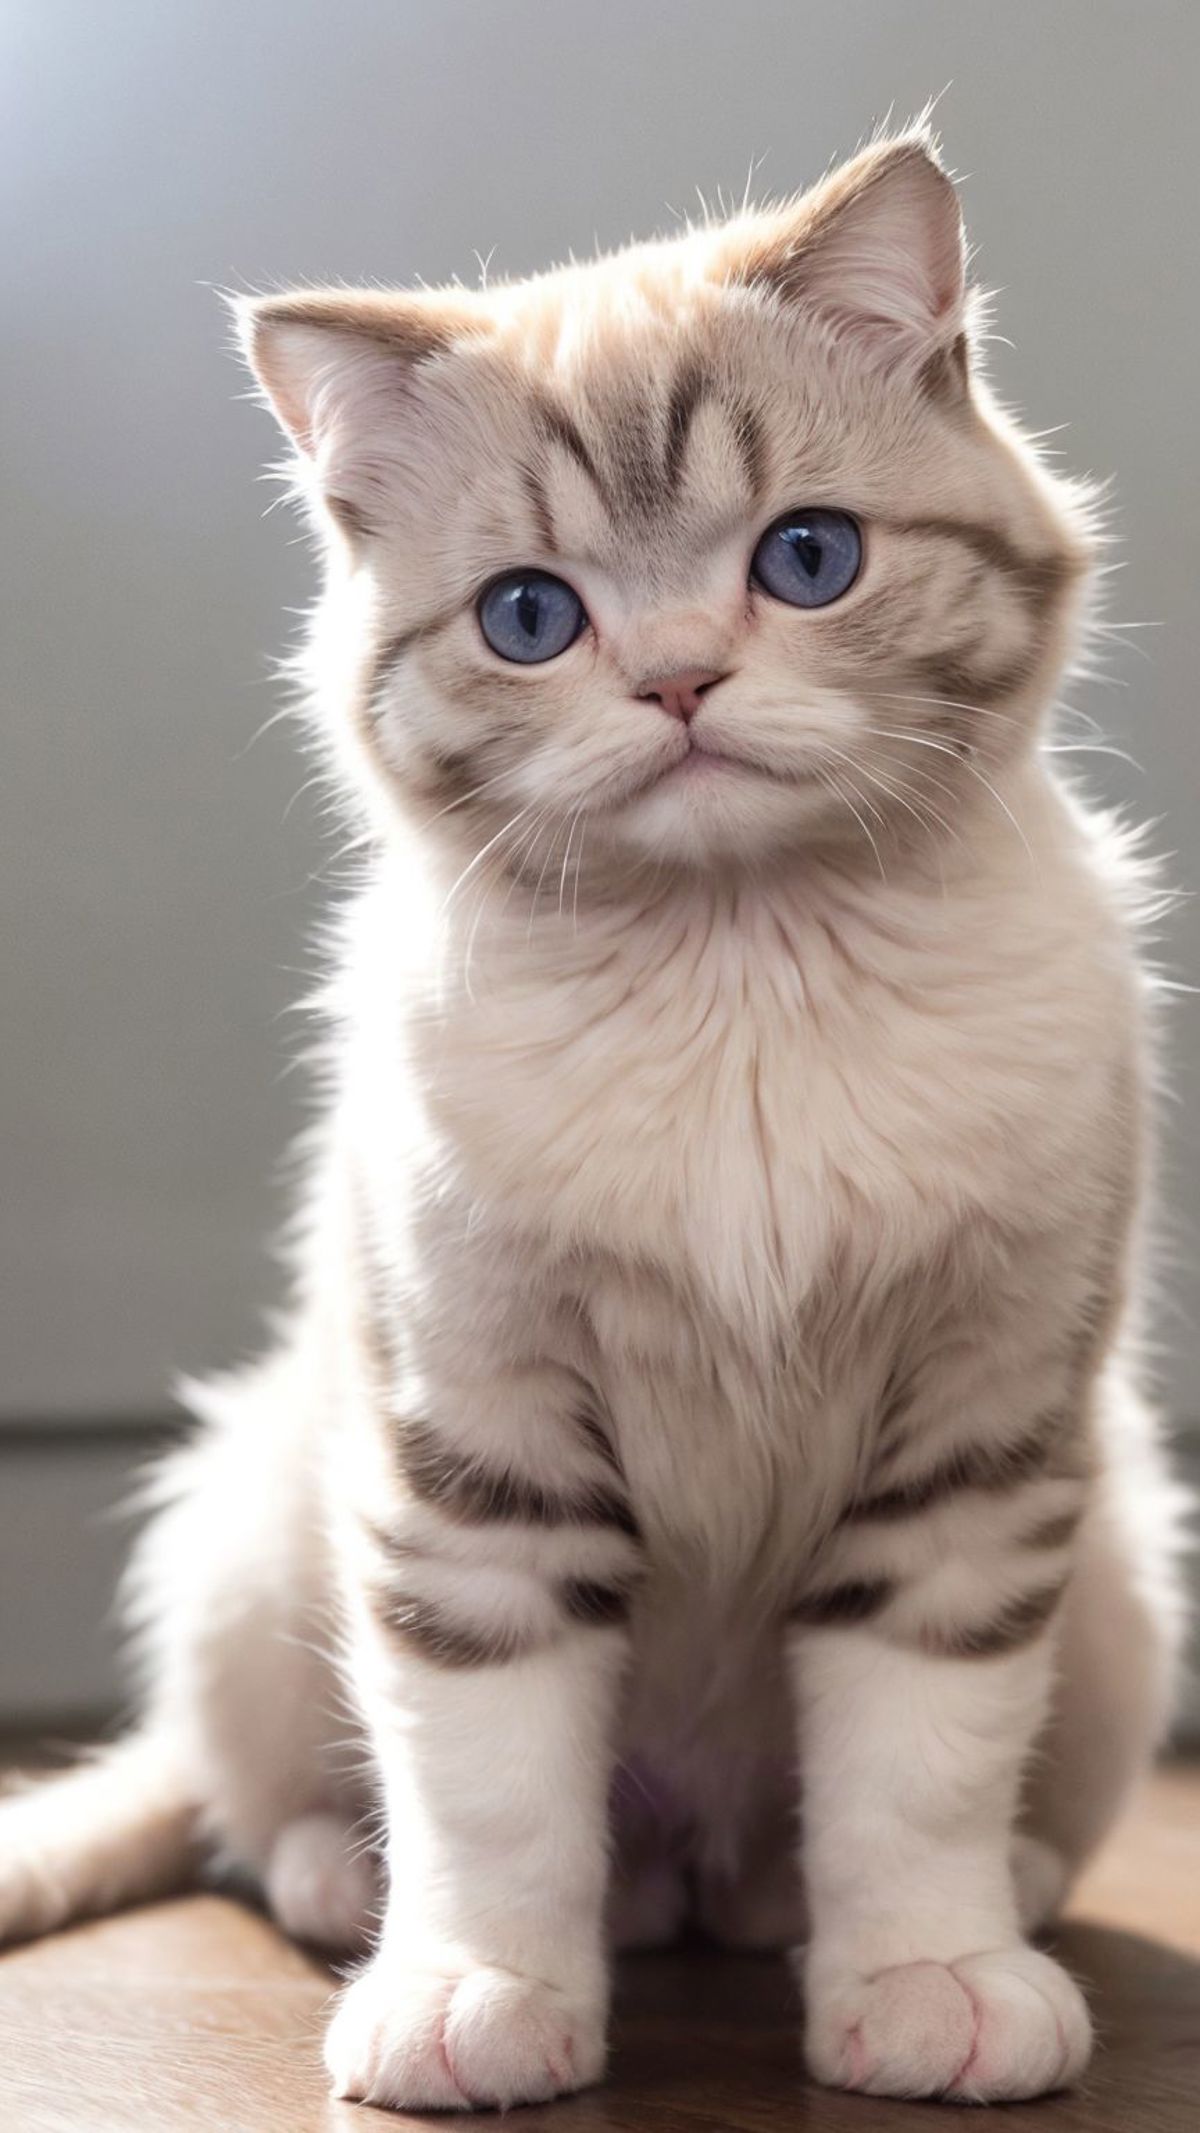 A close-up of a white kitten with blue eyes looking straight ahead.